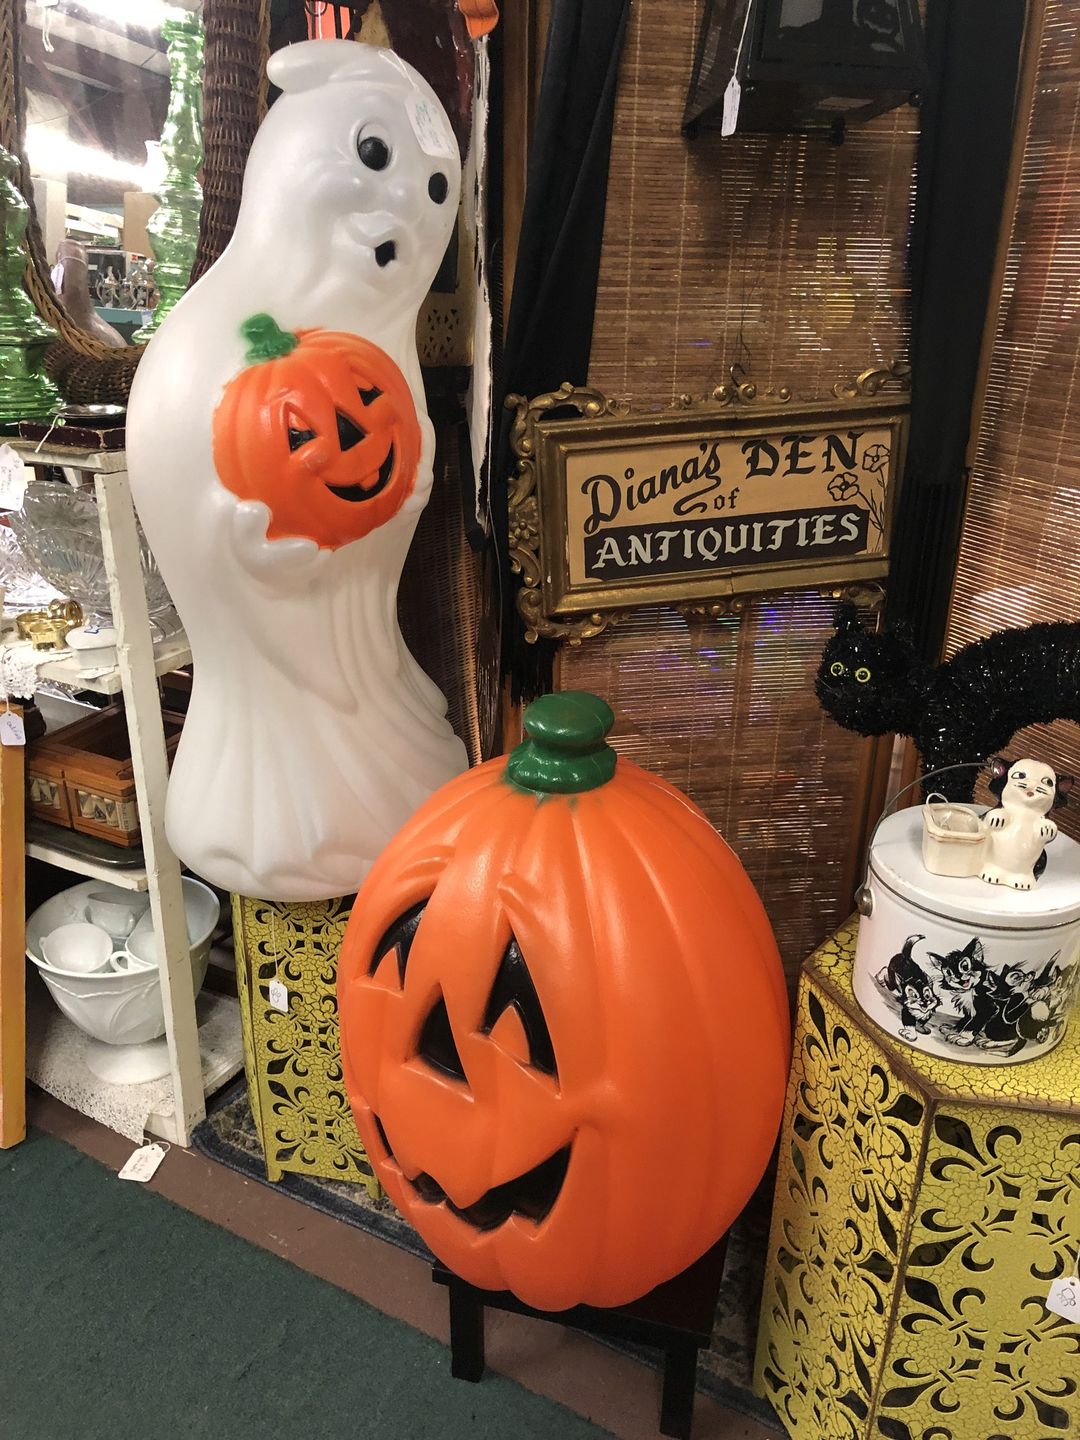 Scranberry Snapshots - Tosh in a pumpkin patch! - Scranberry Coop - Vintage Store - Antiques, Collectibles, & More